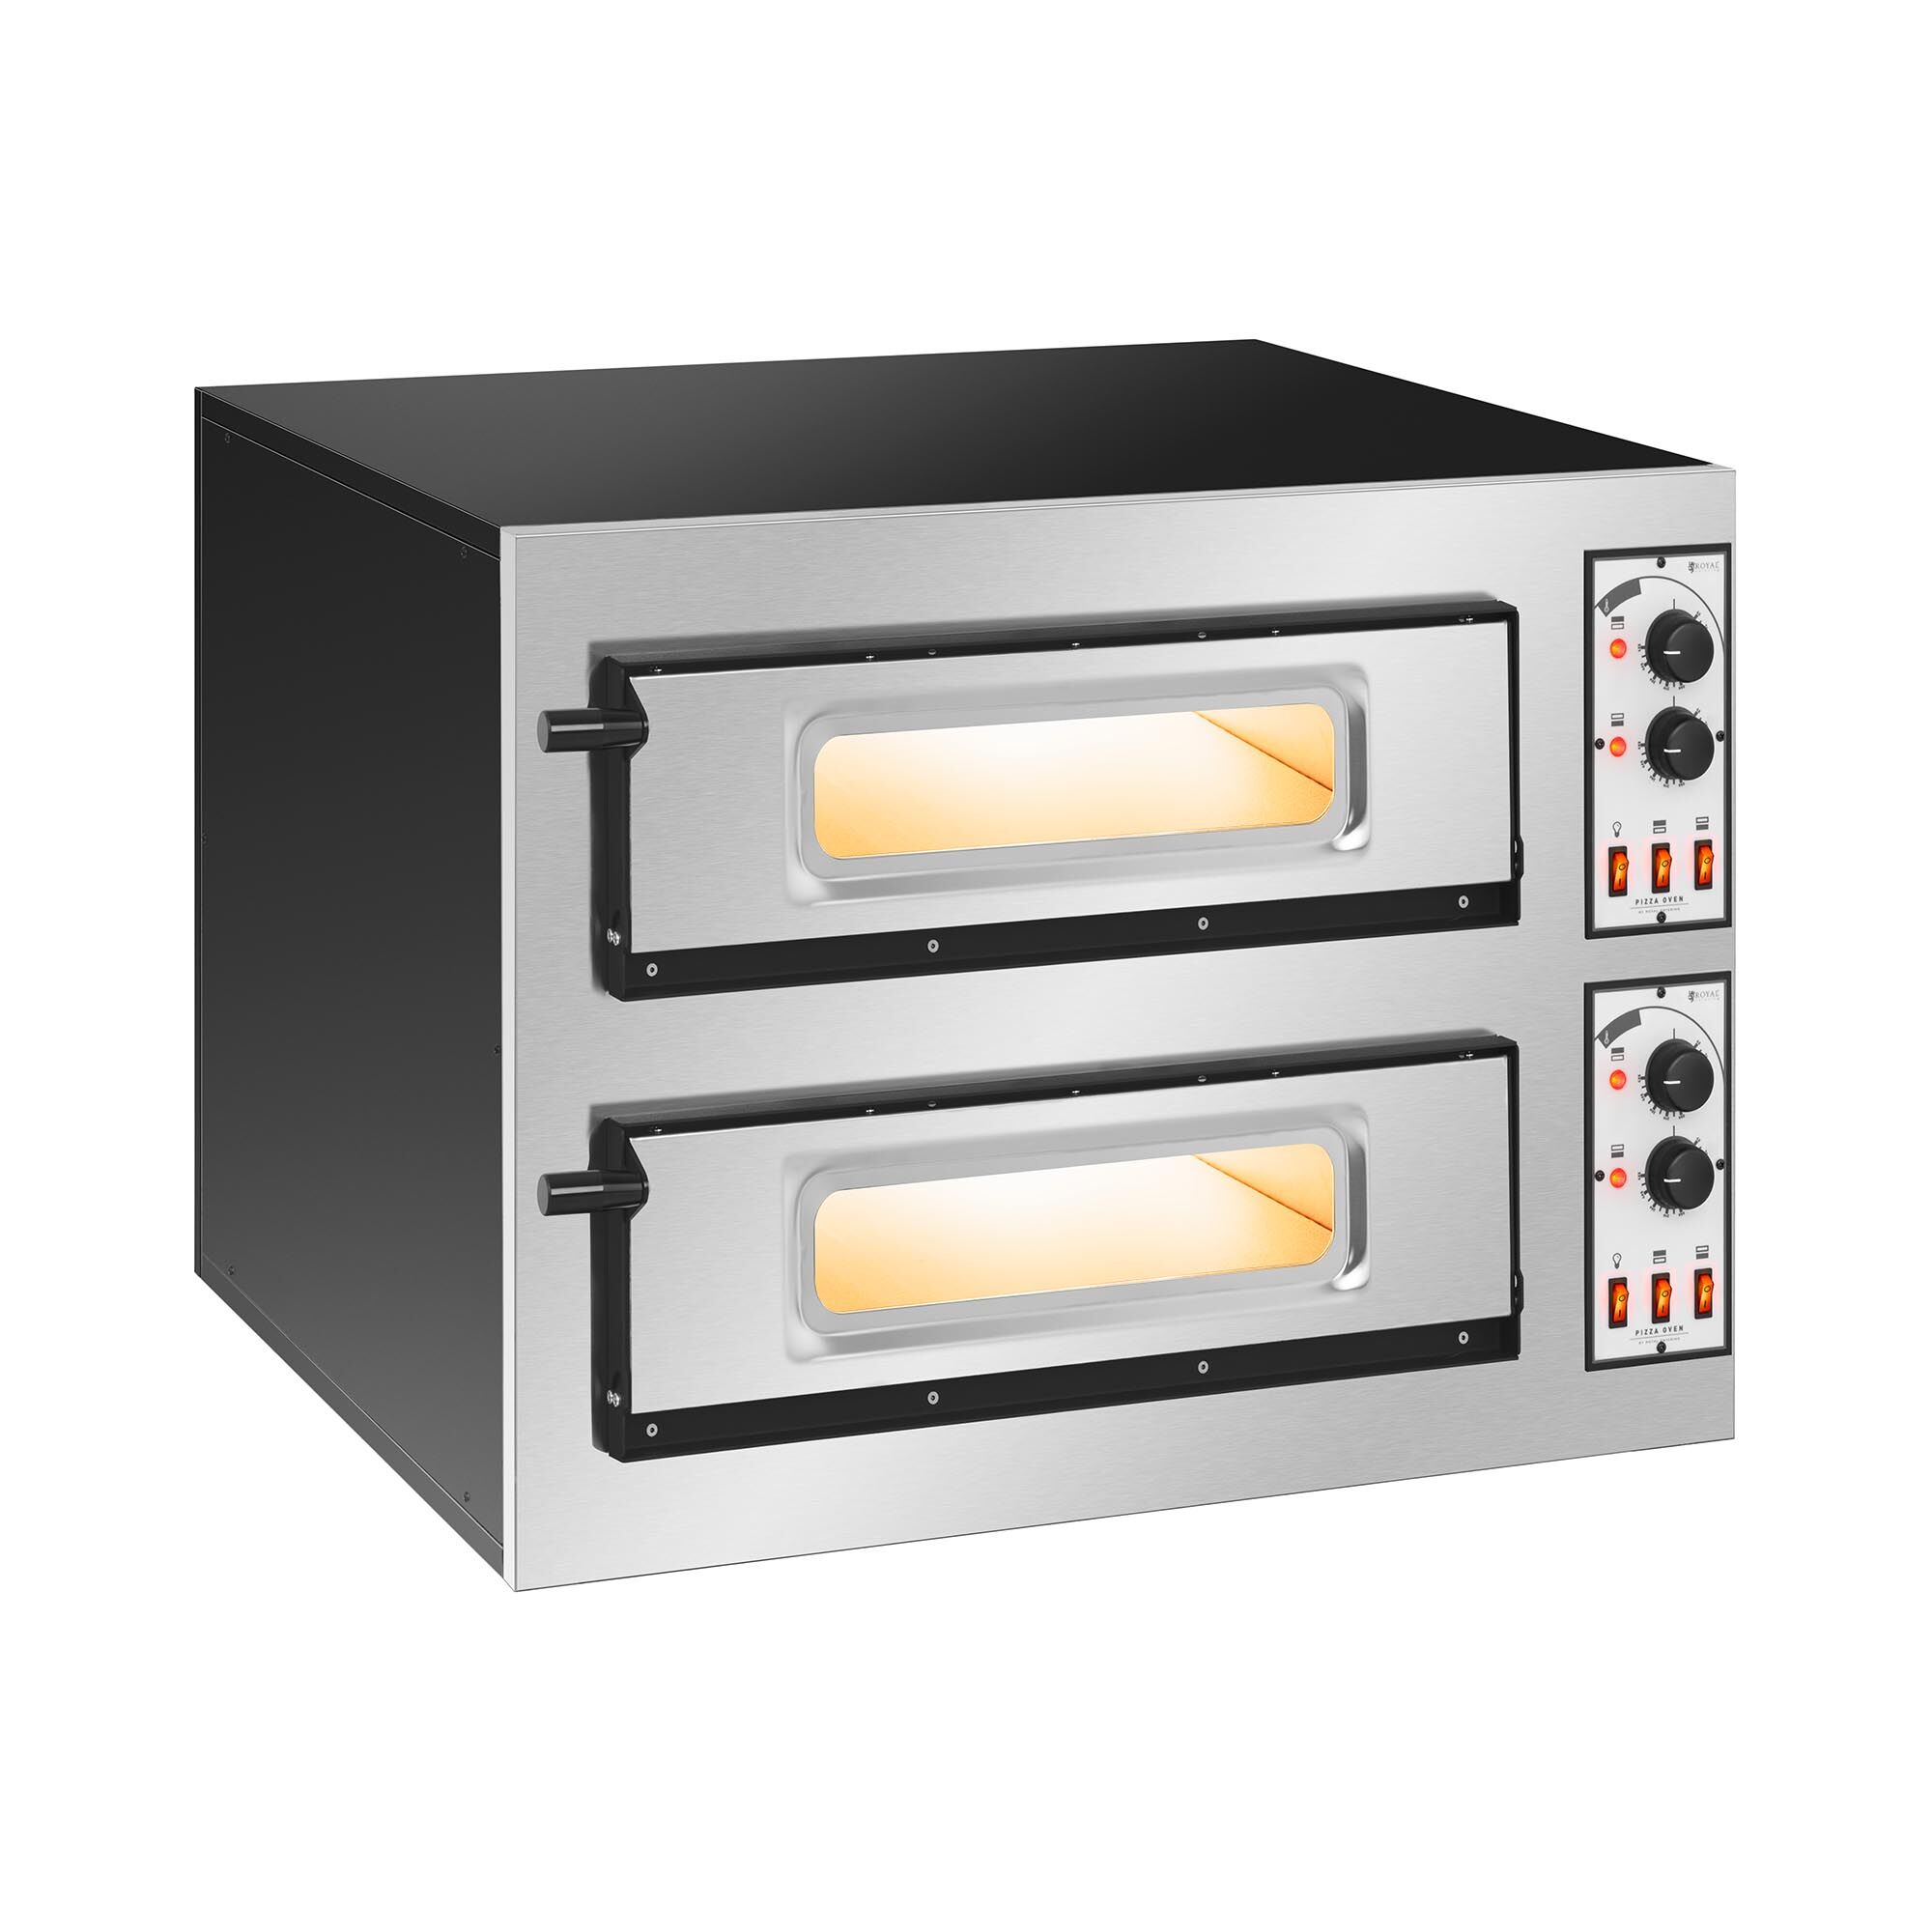 Royal Catering Pizzaoven - 2 kamers - 2 x Ø 45 cm 10011806